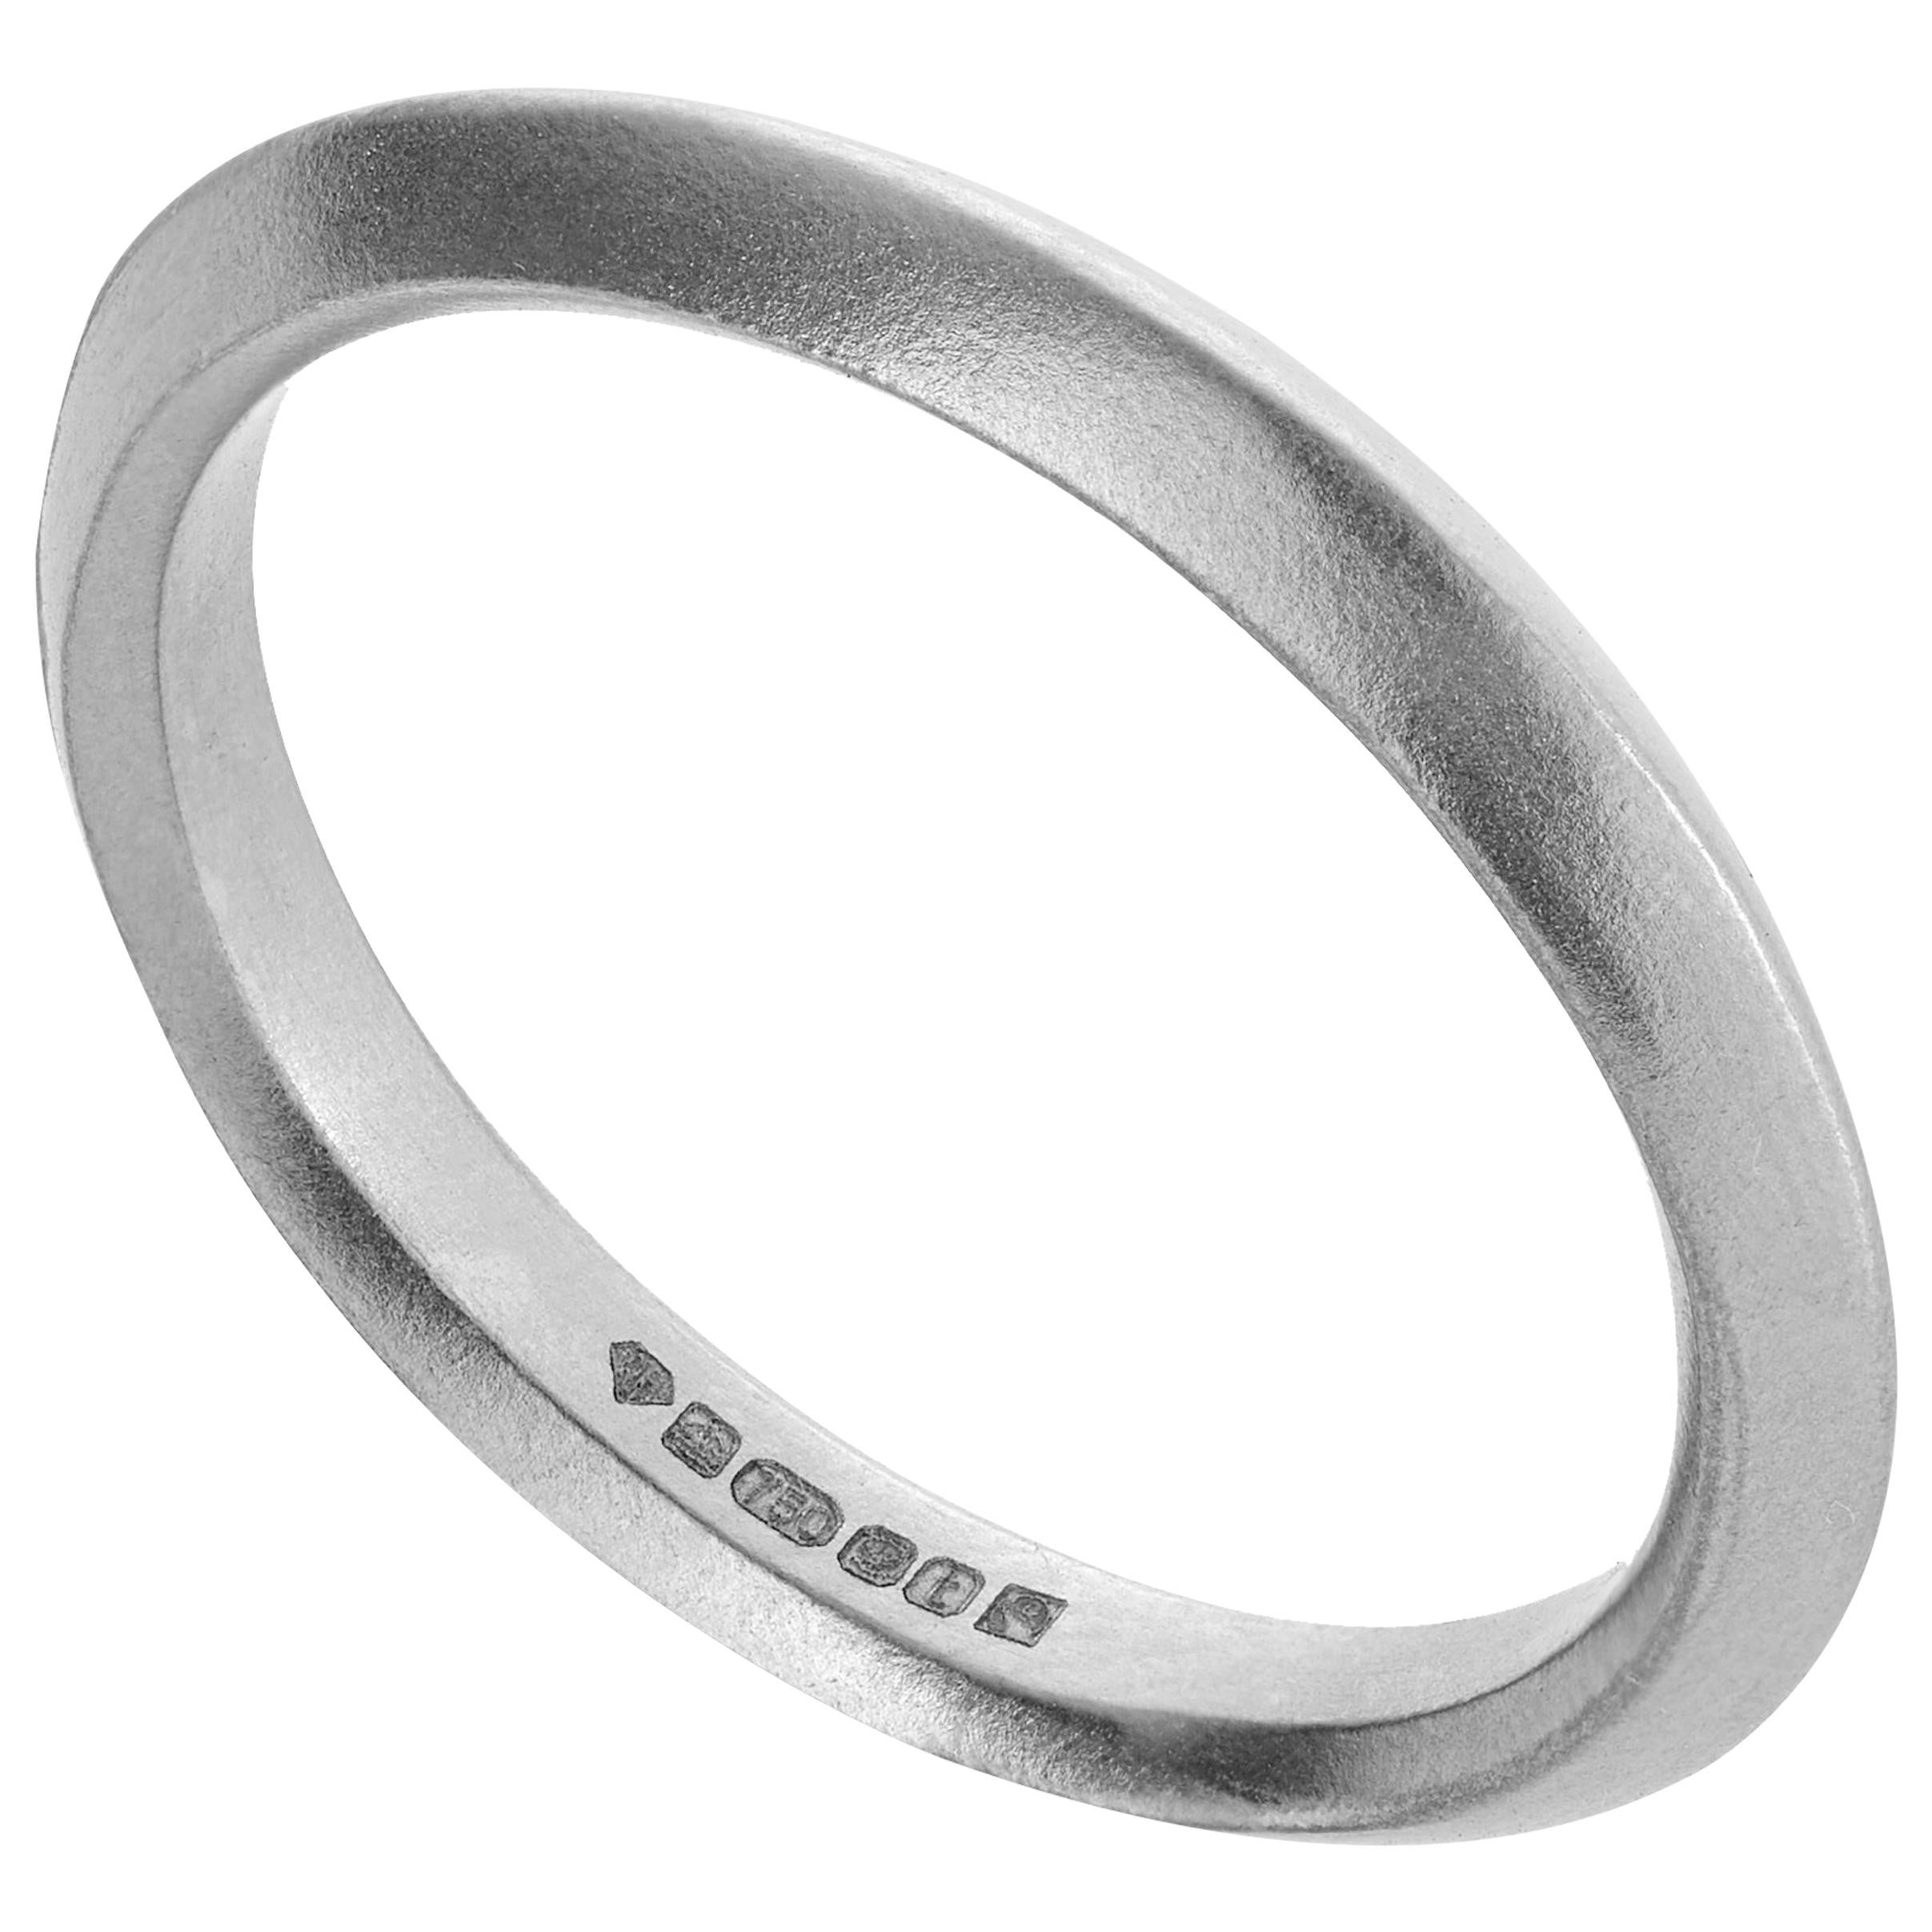 The Rock Hound Inverted Ring in 18 Carat White Fairtrade Gold